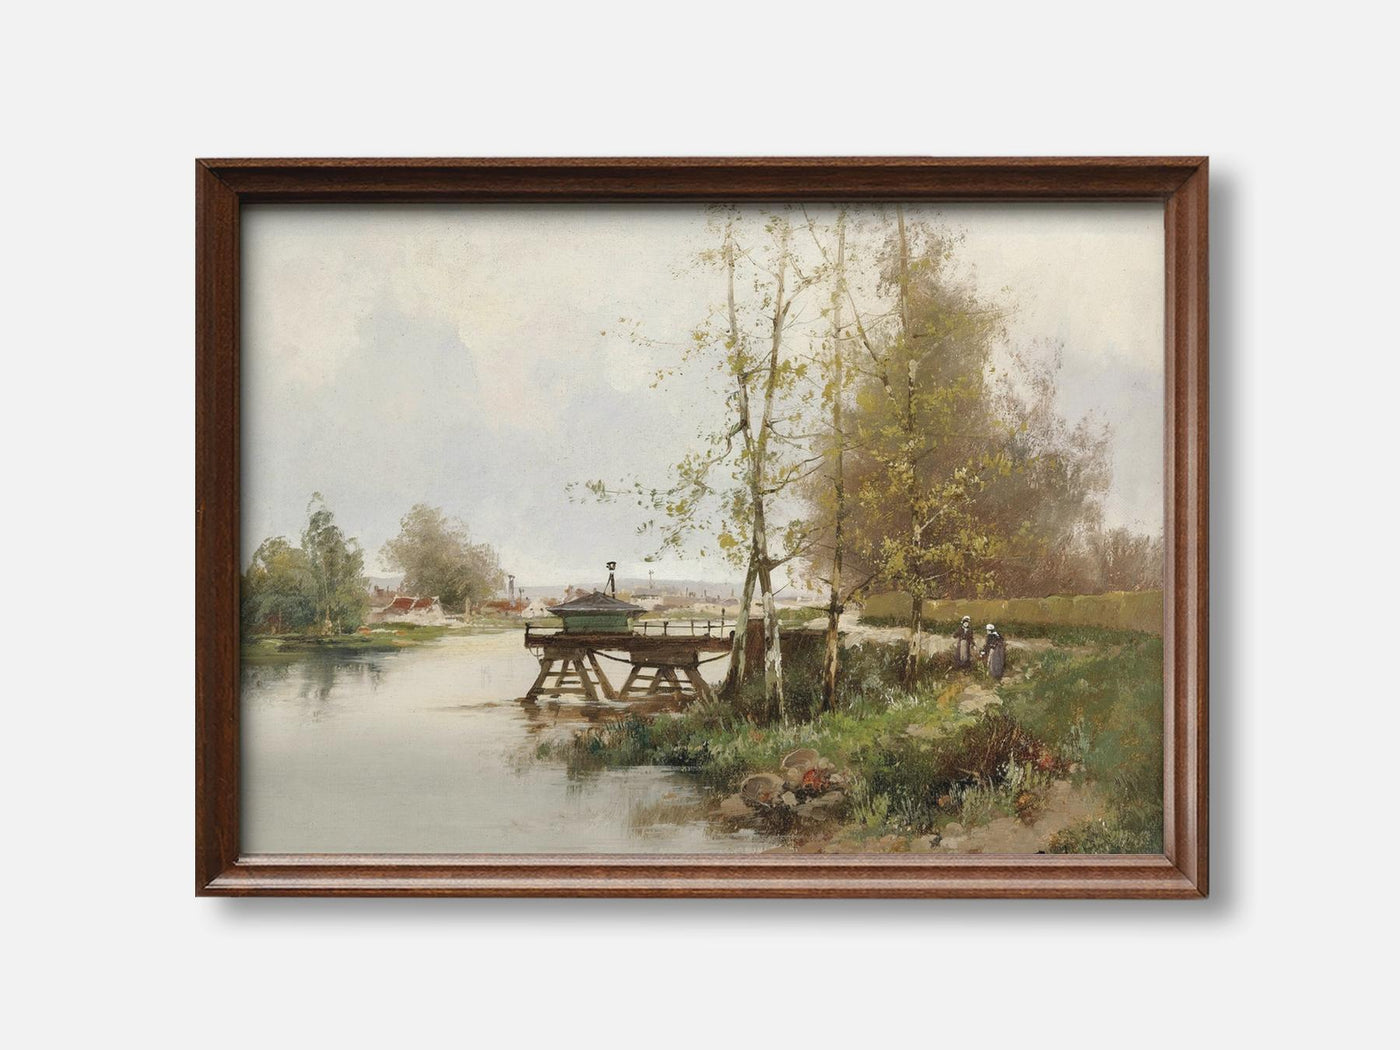 The Pond at the edge of the village Art Print mockup - A_p15-V1-PC_F+WA-SS_1-PS_5x7-C_def variant